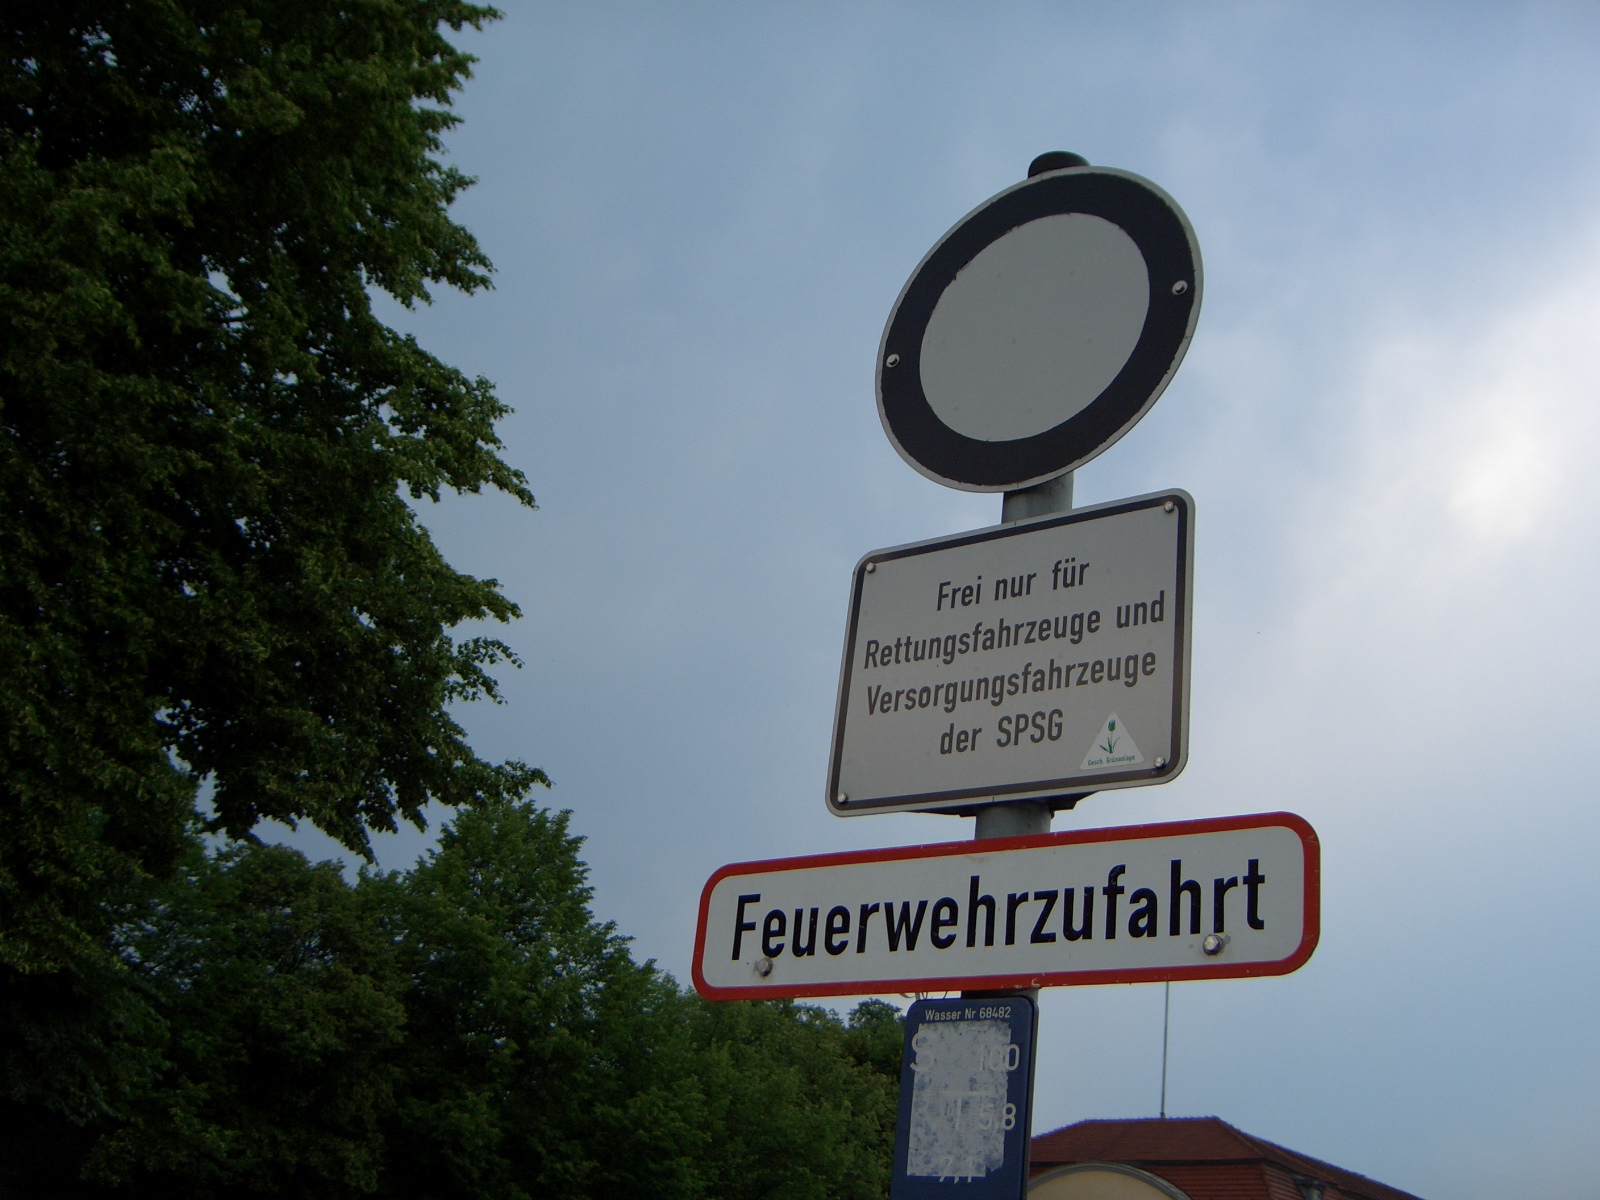 a street sign in german with a clock and some trees in the background